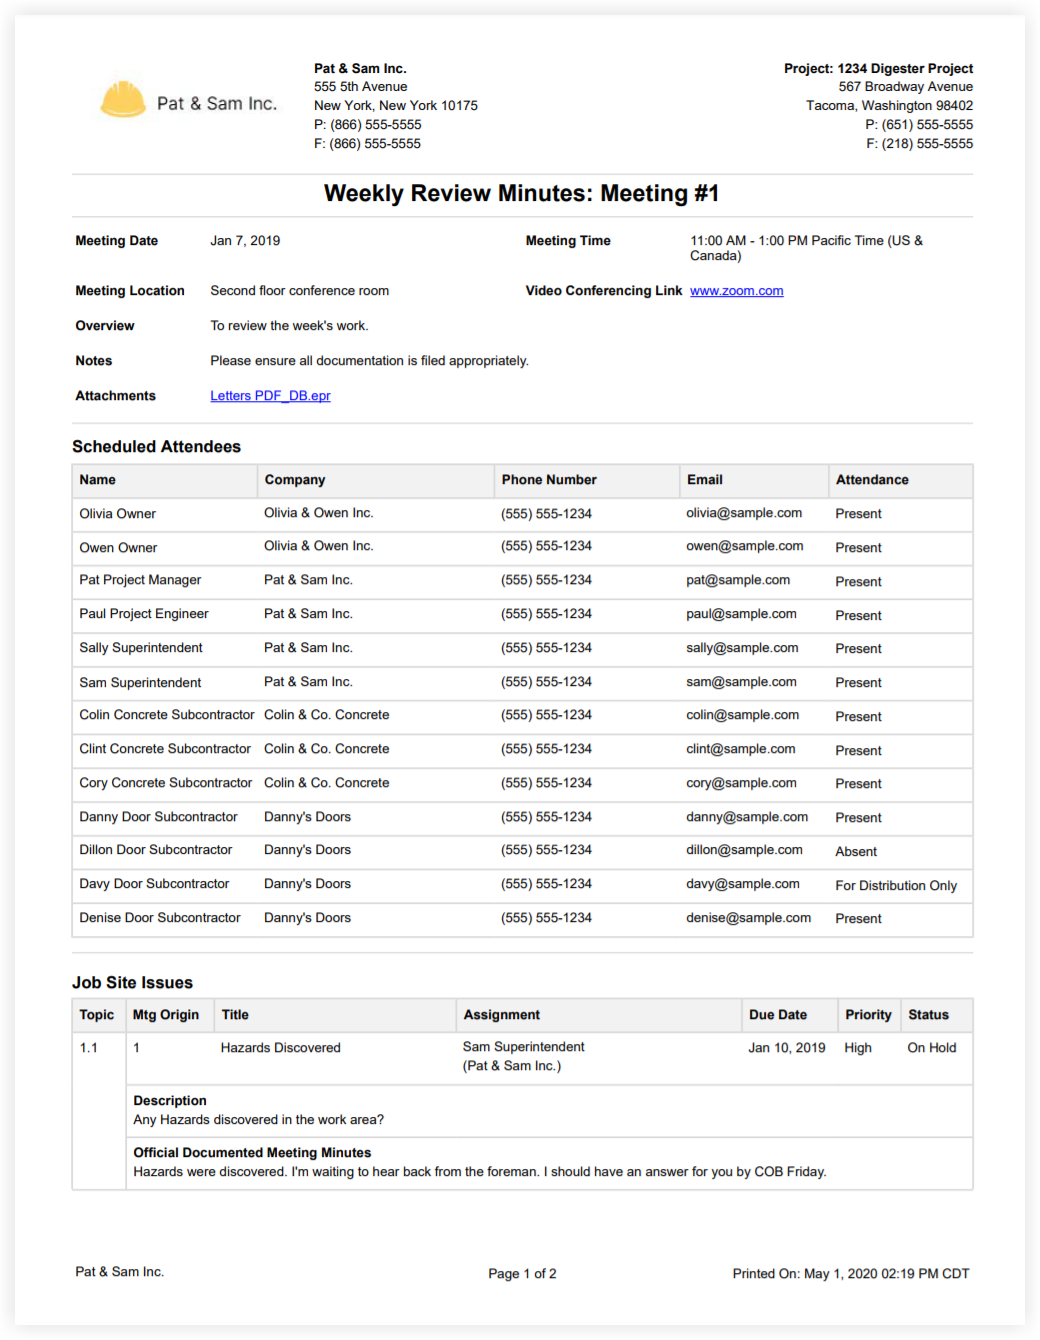 meetings-ann-updated-pdf-export-page1.png